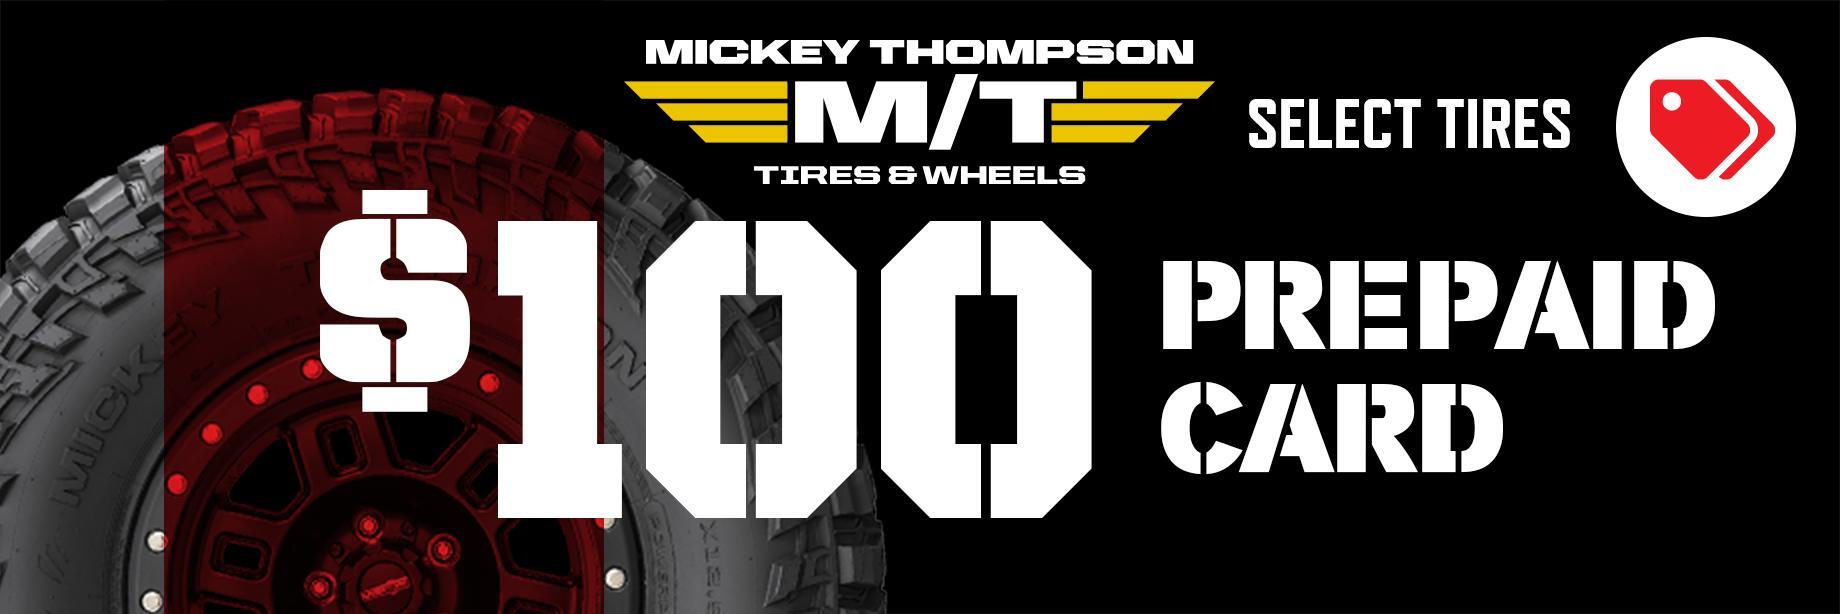 Mickey Thompson tire rebate for May 2021 with Discount Tire Direct